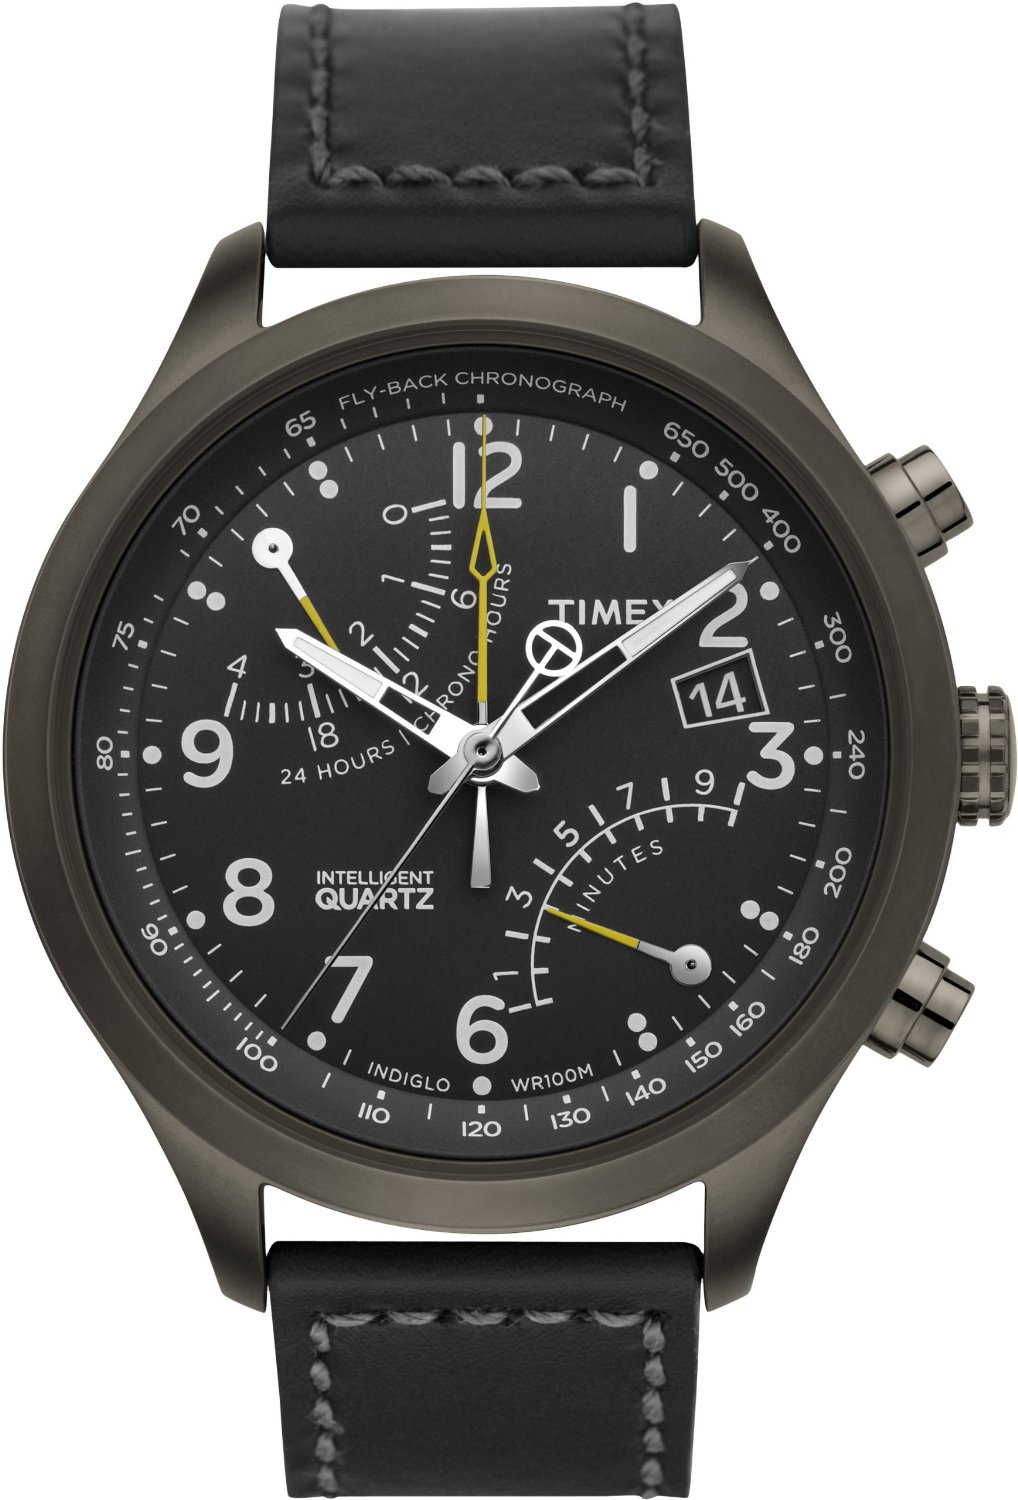 Timex Men's T2N699DH Intelligent Quartz T Series Racing Fly Back Chrono Stainless steel Case Black Strap Watch  $105.00